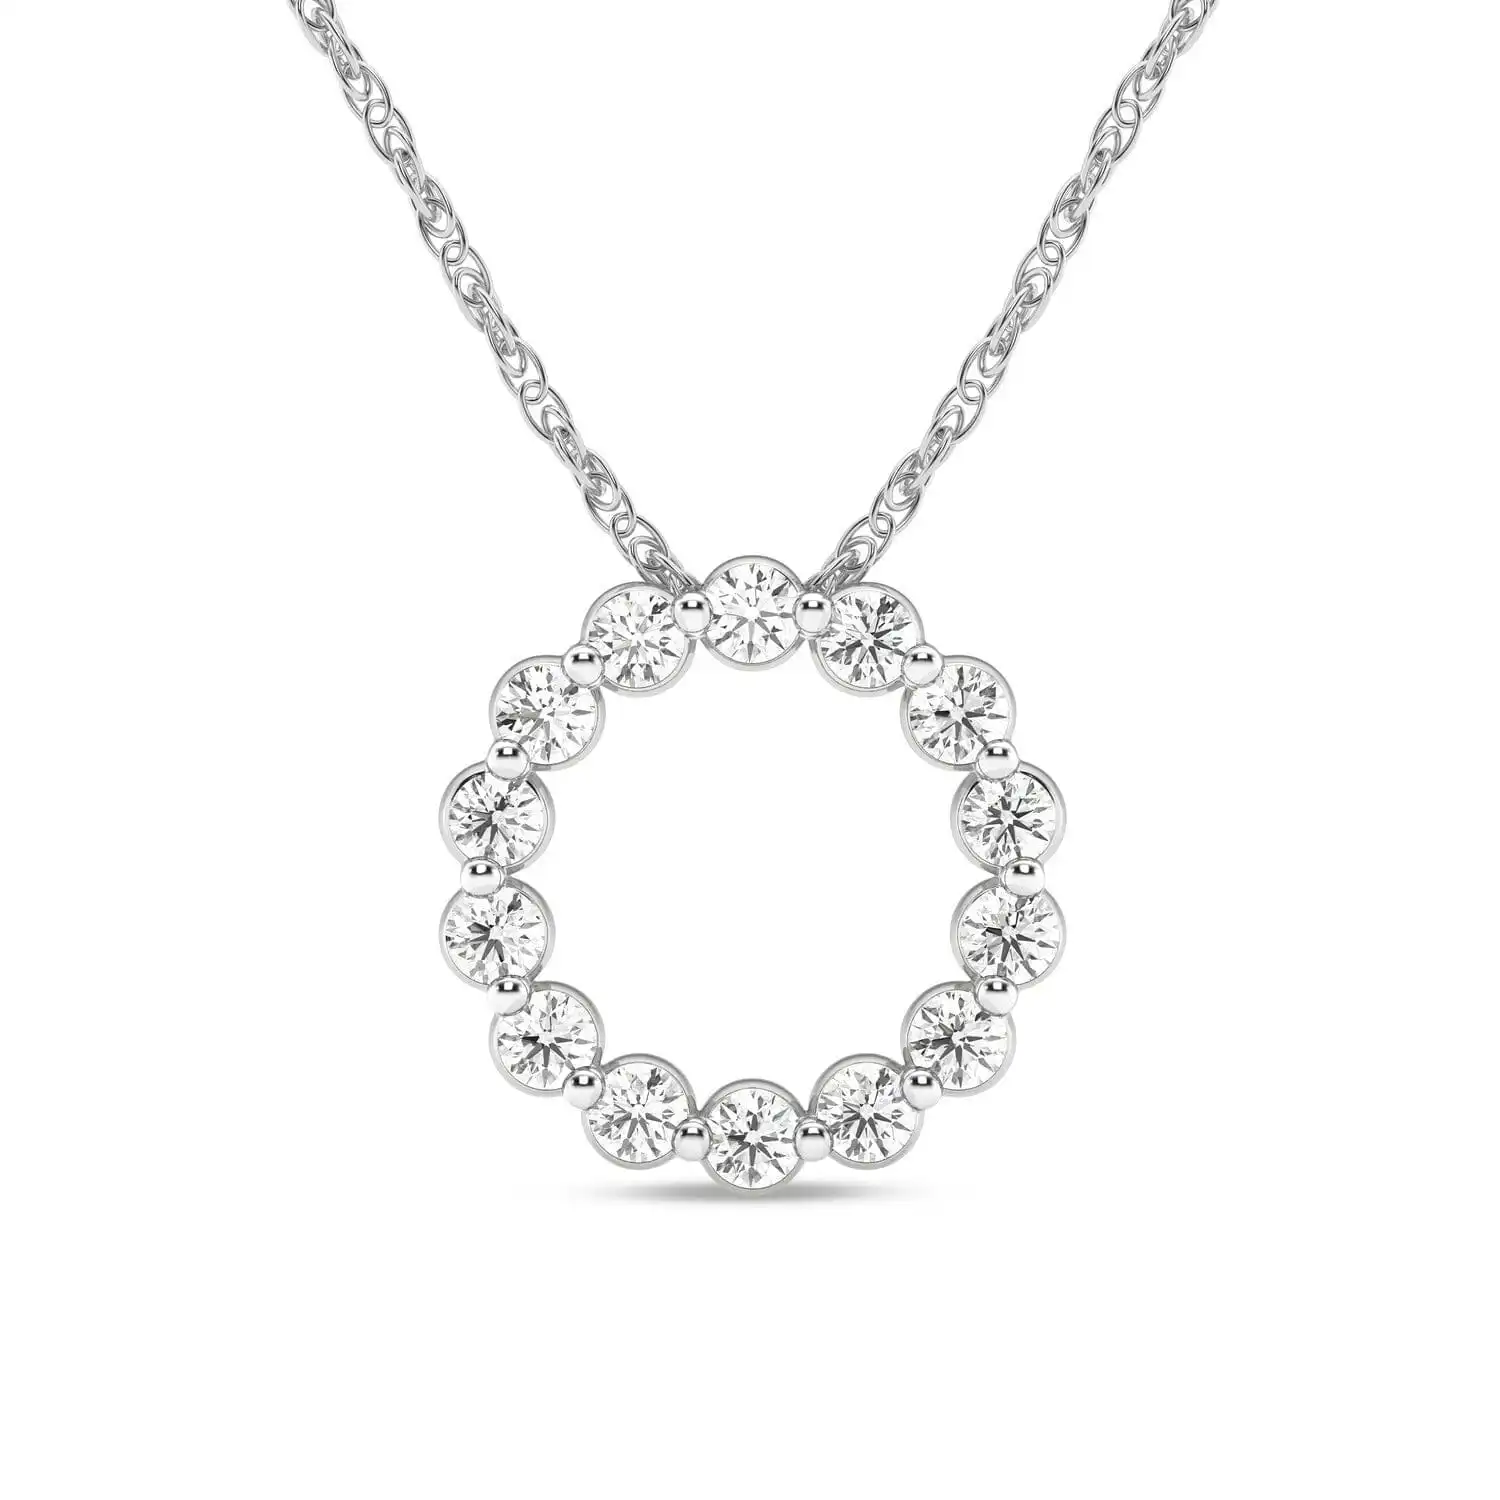 Meera Circle of Love Necklace with 1/2ct of Laboratory Grown Diamonds in 9ct White Gold